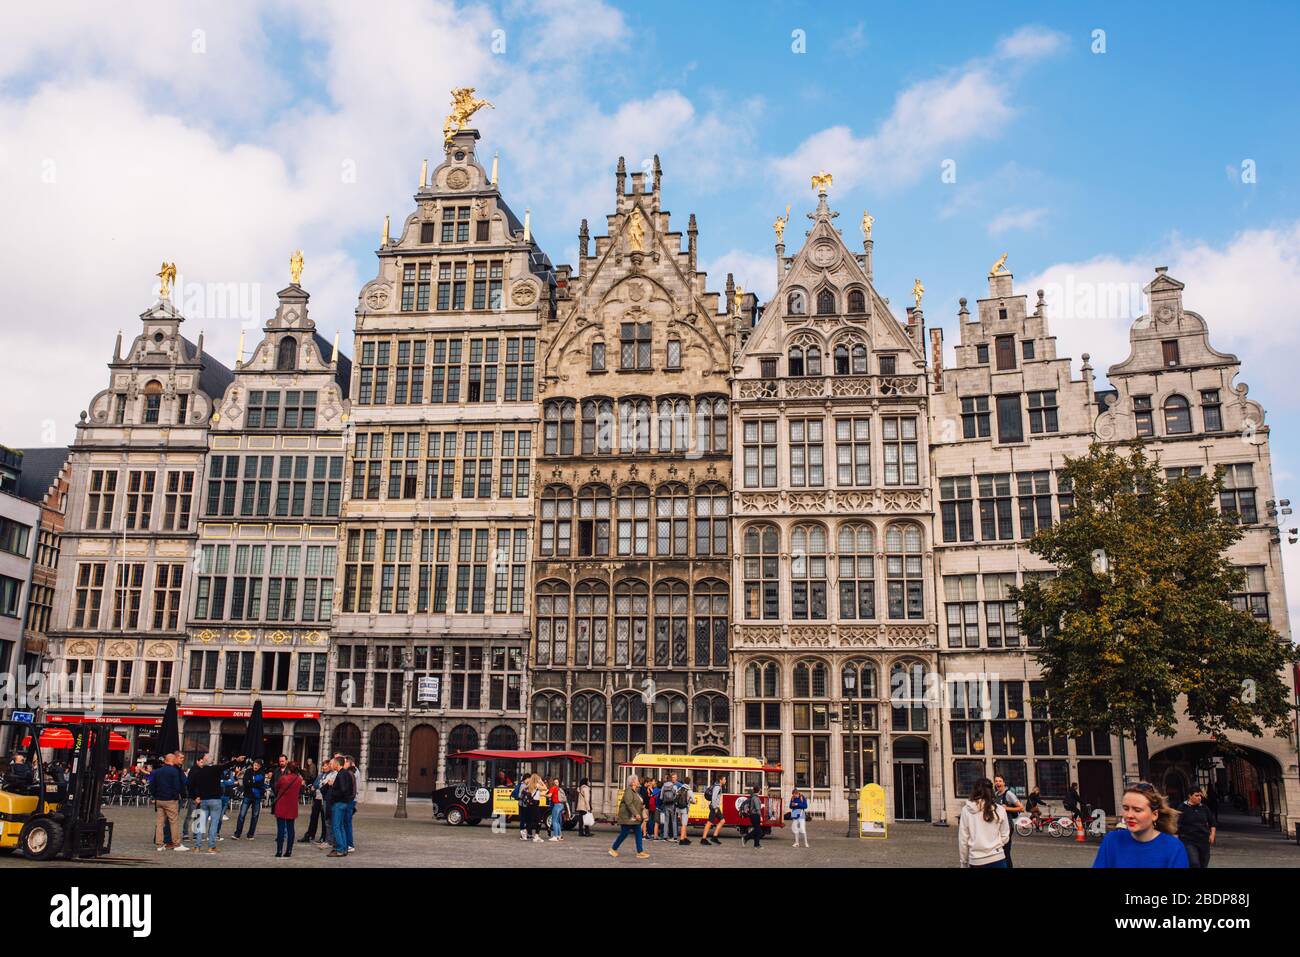 Grote Markt, Antwerp, city square with the town hall, carefully designed guilds of the 16th century, many restaurants and cafes. A Visit To Belgium. T Stock Photo